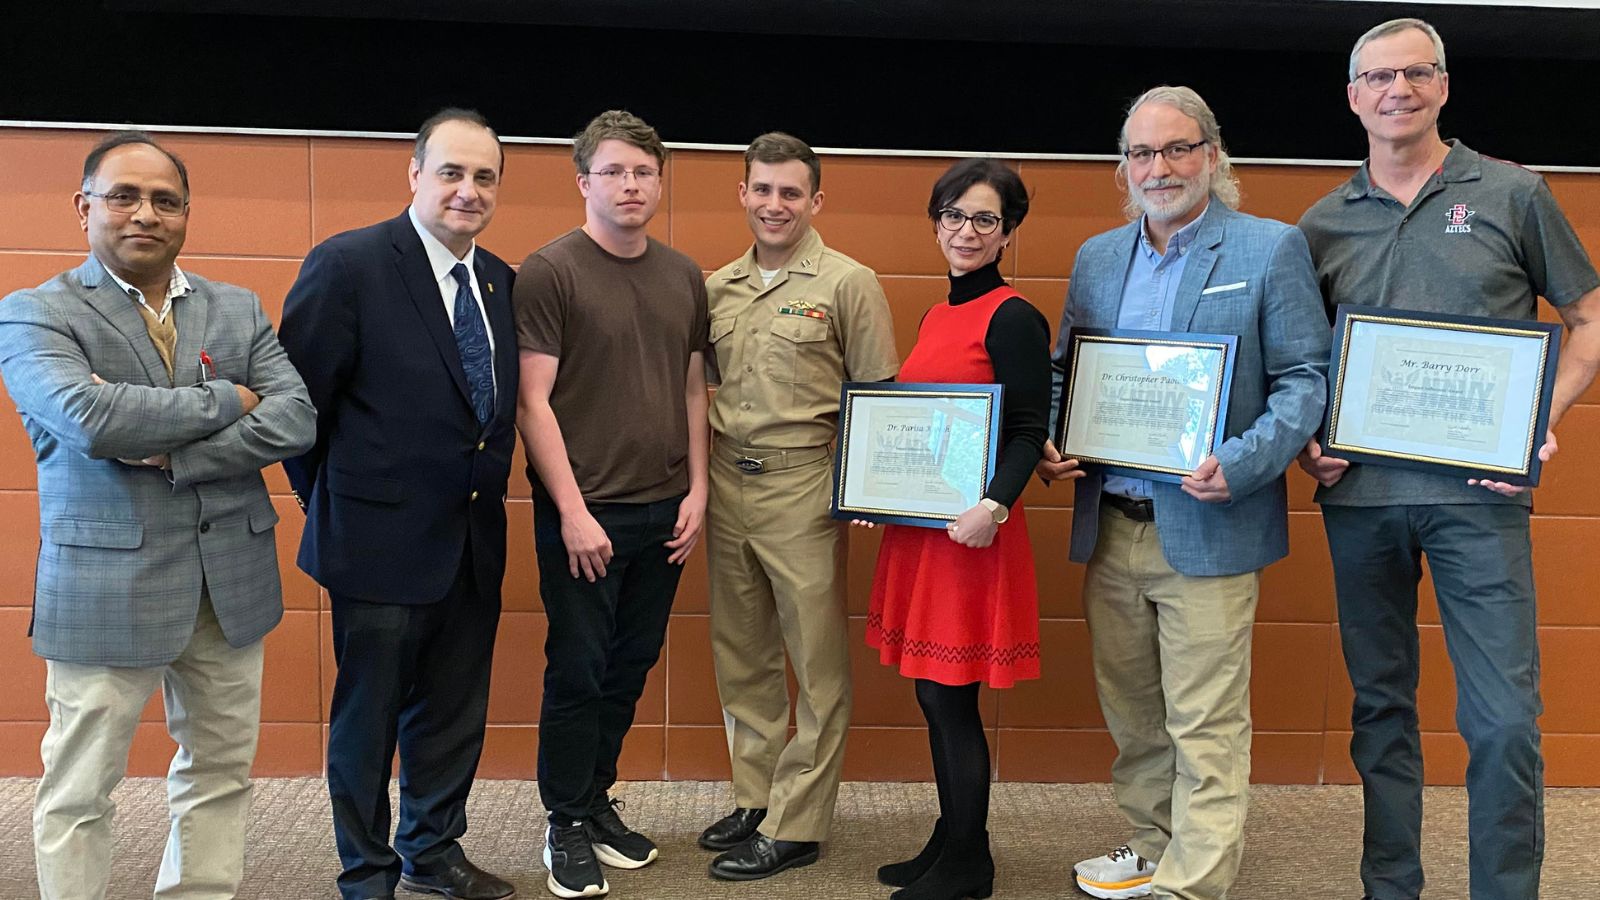 Left to Right: Dr. Satish Sharma, Interim Department Chair for Electrical and Computer Engineering, Dean Eugene Olevsky, ;SDSU ECE Junior Justin Lee, Nuclear Submarine Navy Ensign Jake Jackson, Lecturer Dr. Parsia Kaveh, Assistant Professor Dr. Chris Paolini and Lecturer Mr. Barry Dorr.